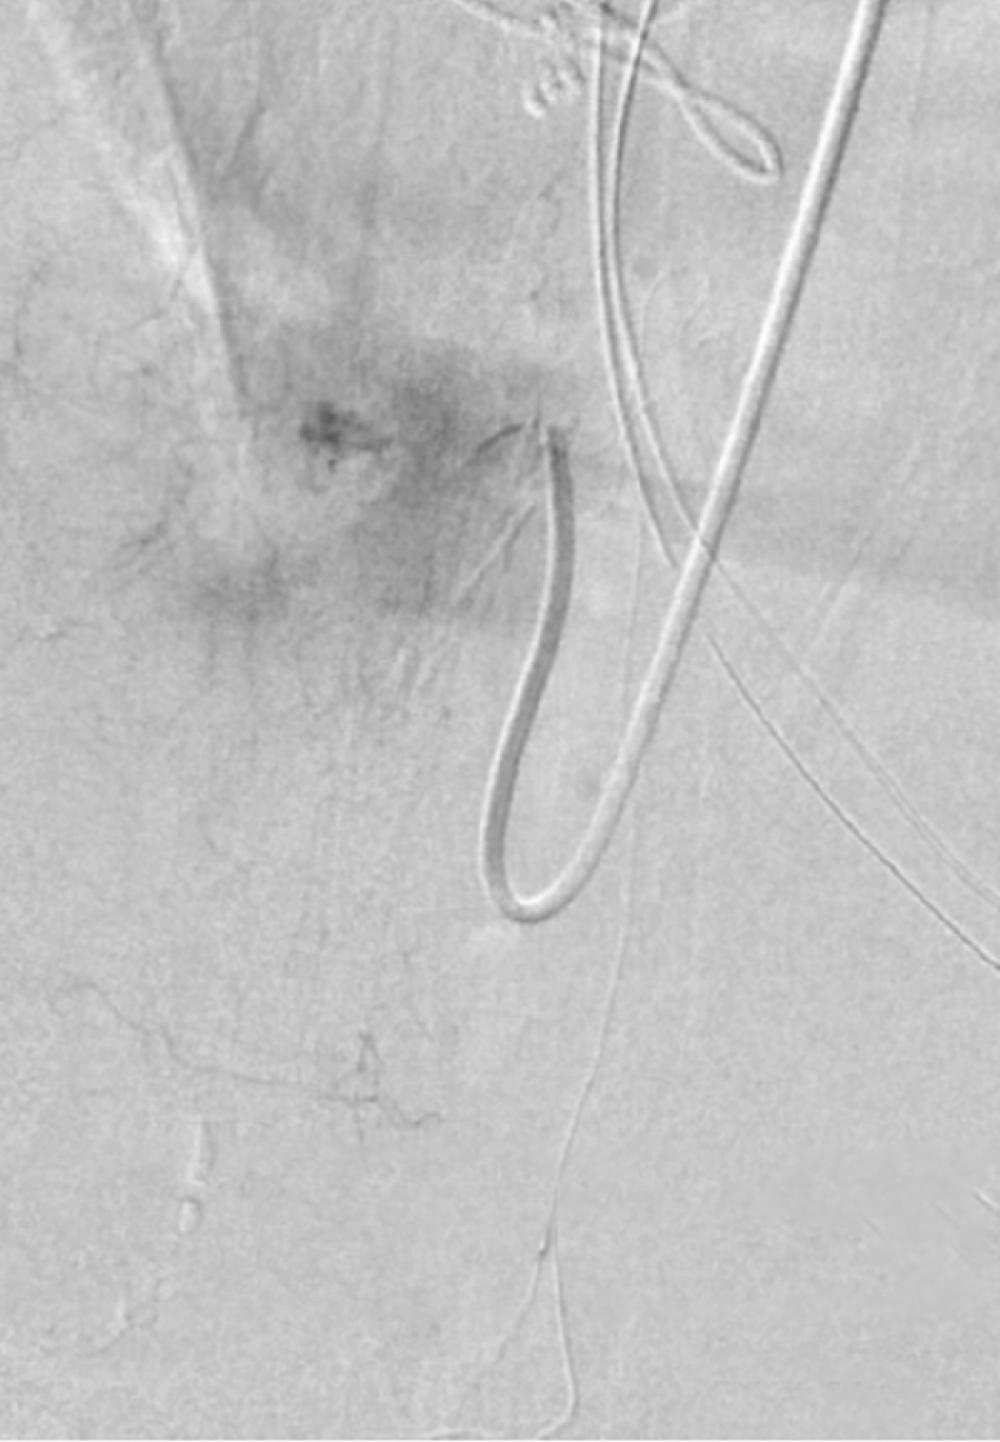 Angiogram After Arteriovenous Fistula Resection